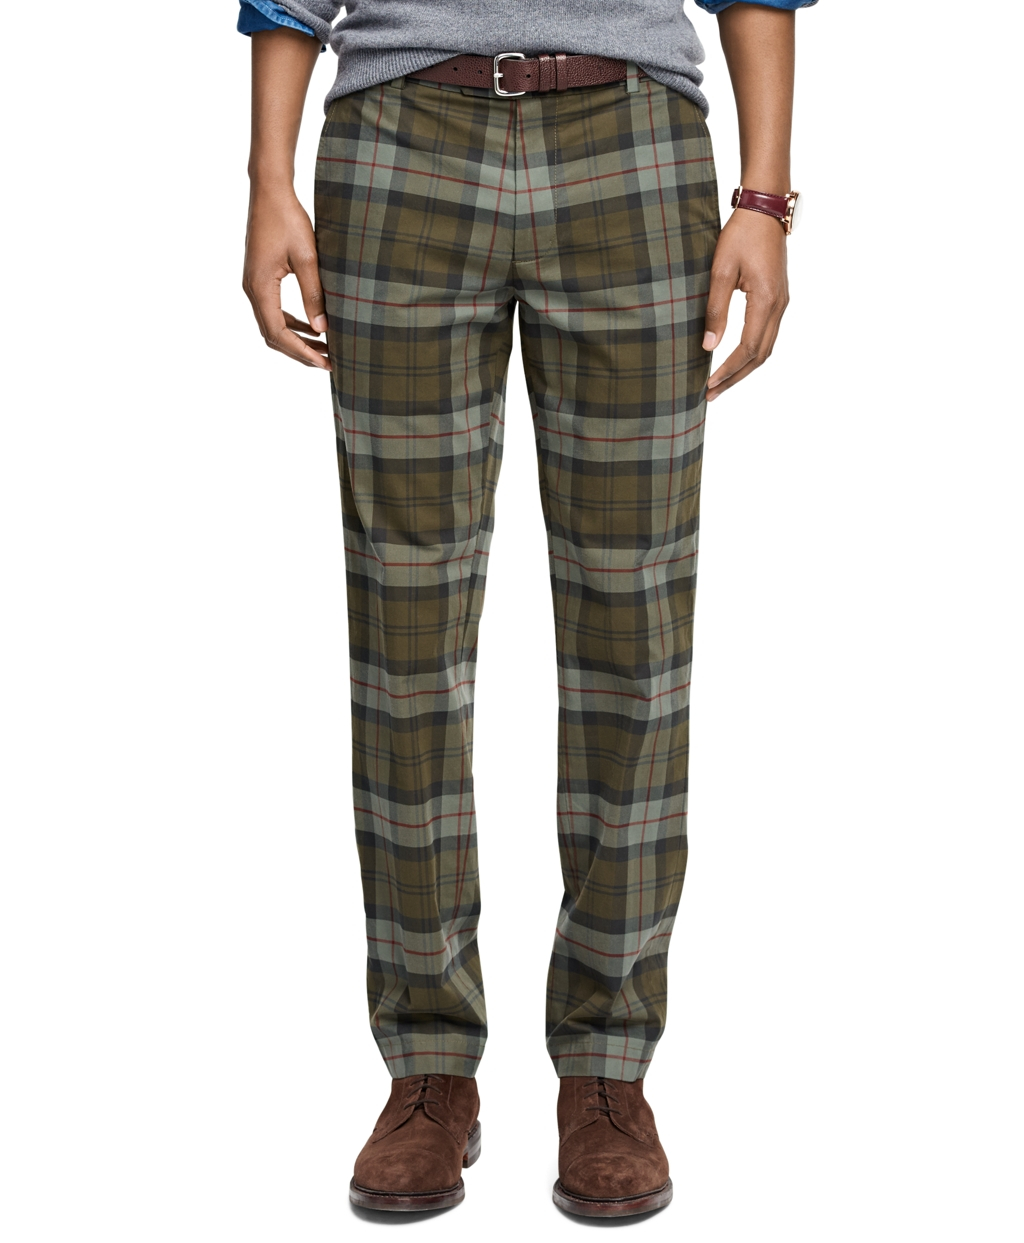 Lyst - Brooks Brothers Milano Fit Tartan Pants in Green for Men